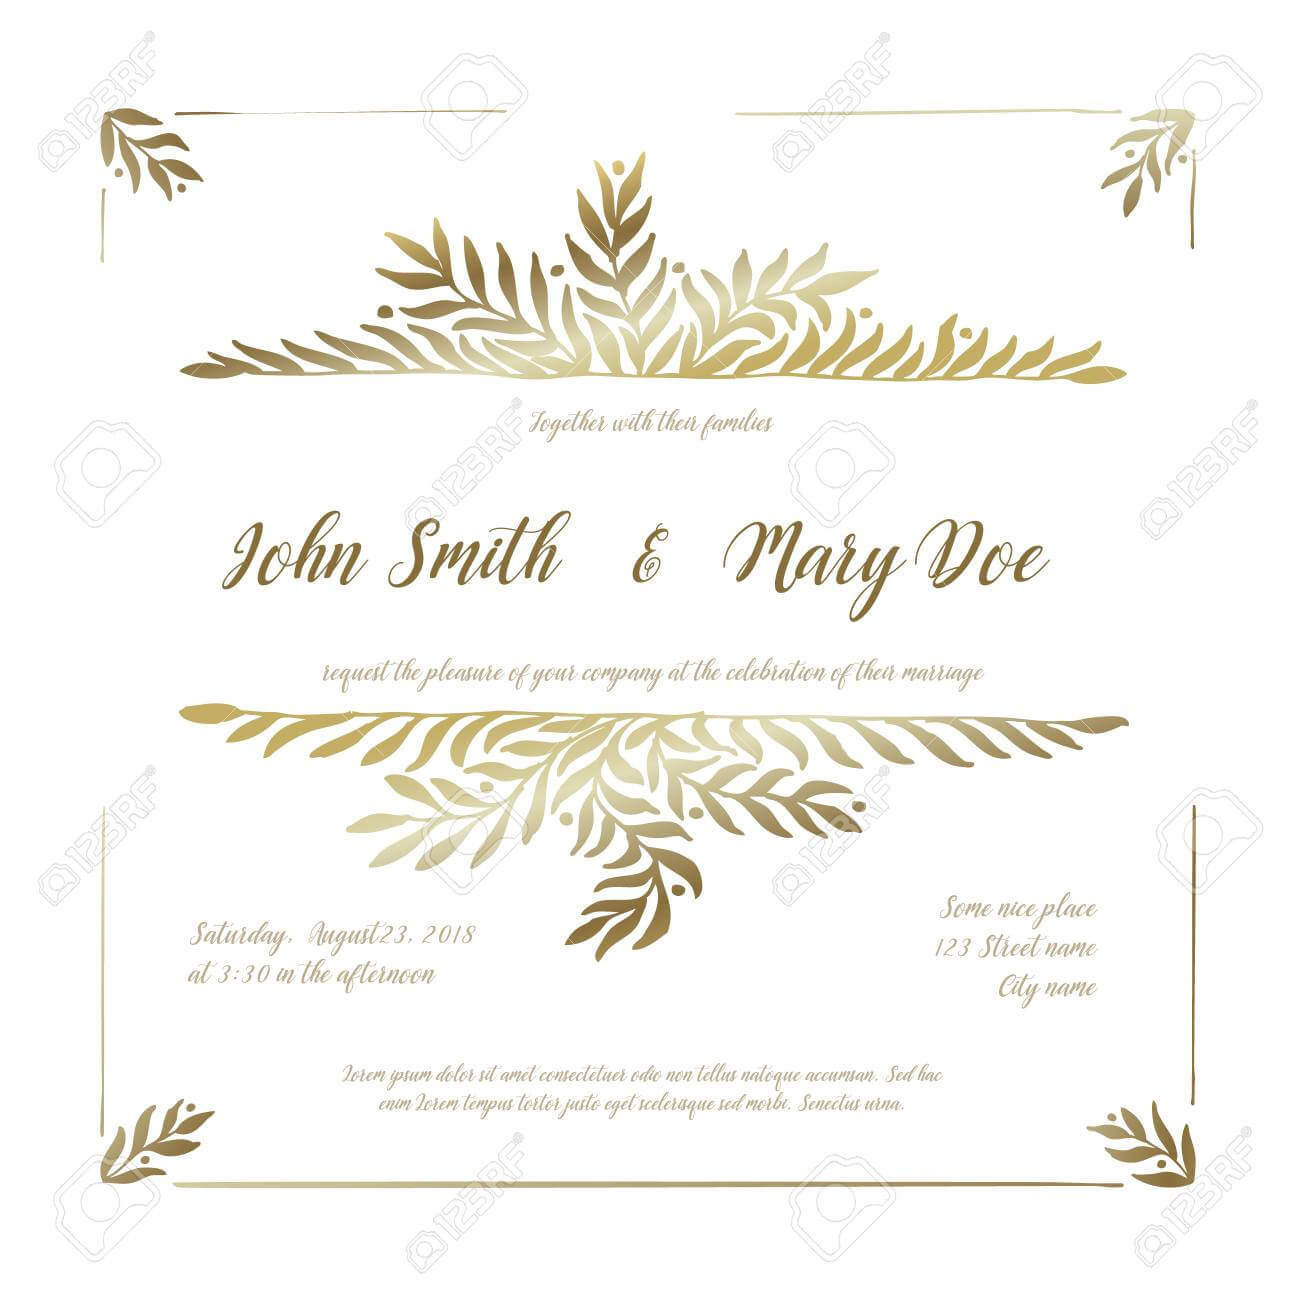 Vector Wedding Invitation Card Template With Golden Floral Elements Pertaining To Invitation Cards Templates For Marriage